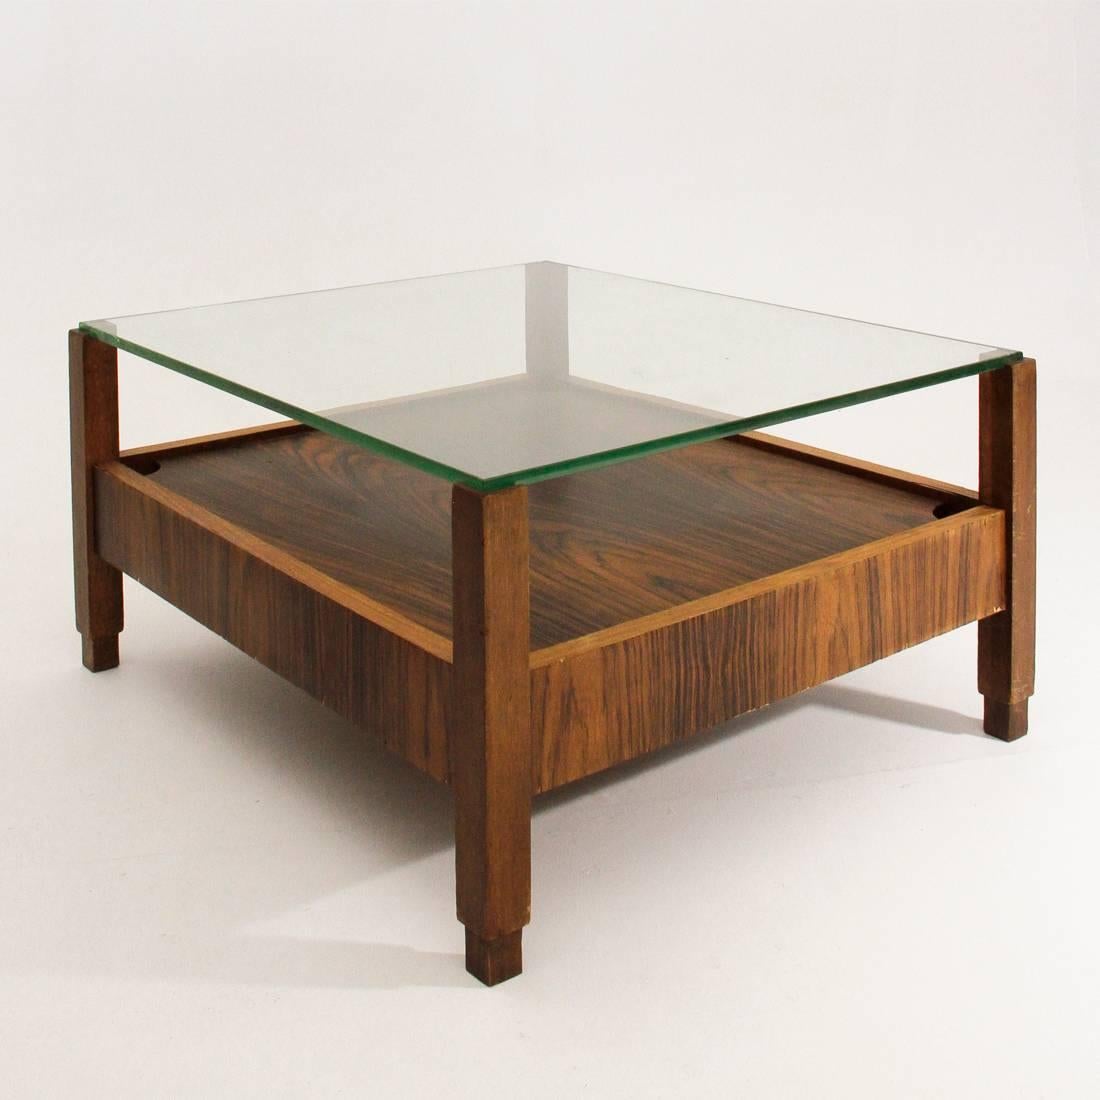 Mid-20th Century Italian Coffee Table with Glass Top, 1960s